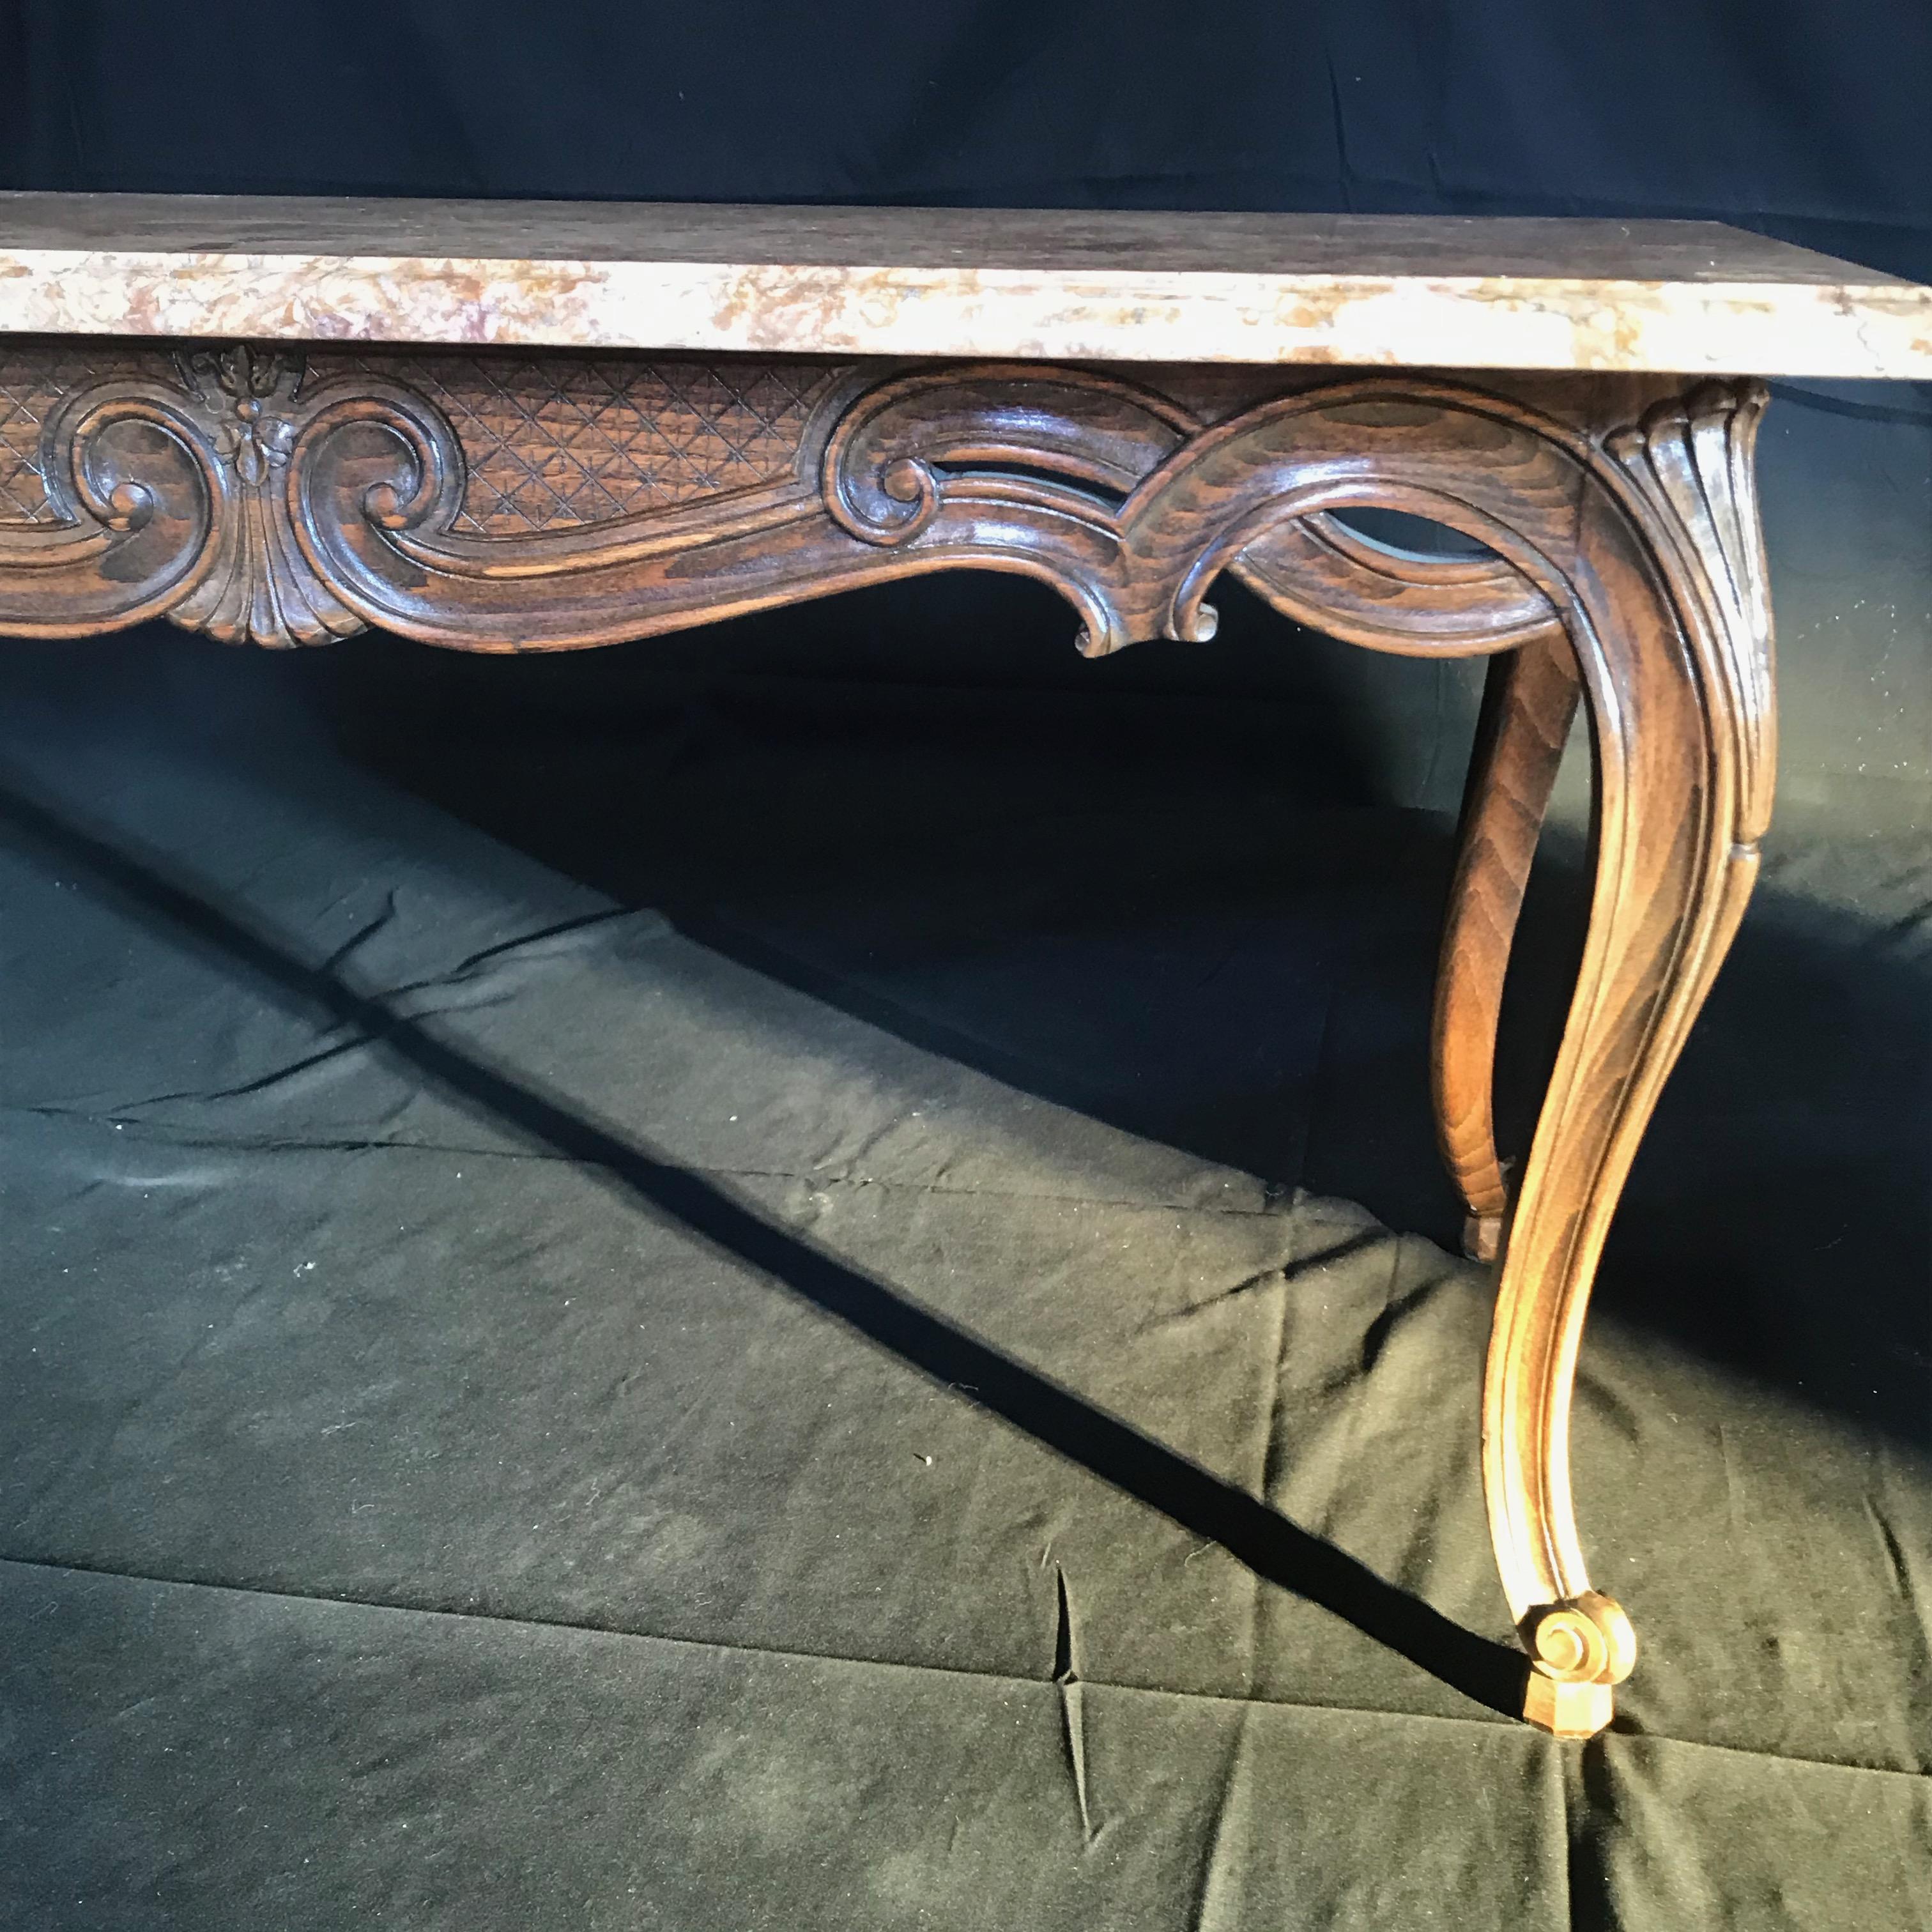 A stunning antique French coffee table having a Louis XV form with an entire walnut frame carved in ribbon design with stunning diamond pattern finely carved into the apron, on tapering legs with snail feet, supporting a beautifully grained neutral